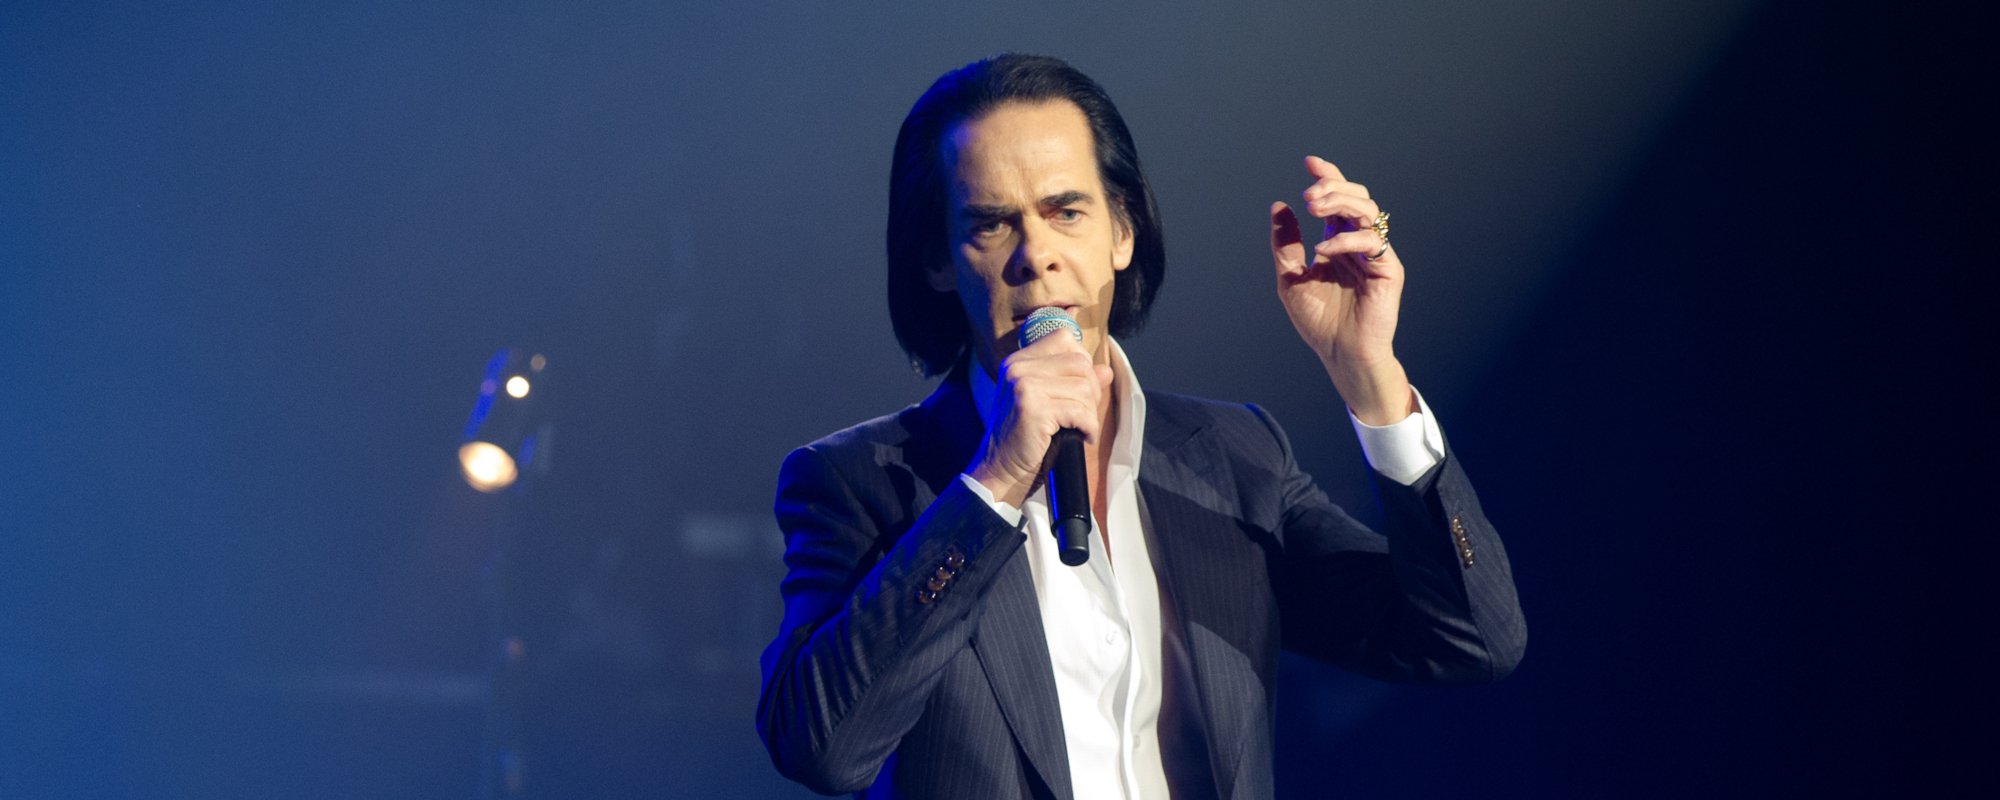 Nick Cave on New 'Nick Cave' A.I. Song: "The Apocalypse is Well on its Way. This Song Sucks.”